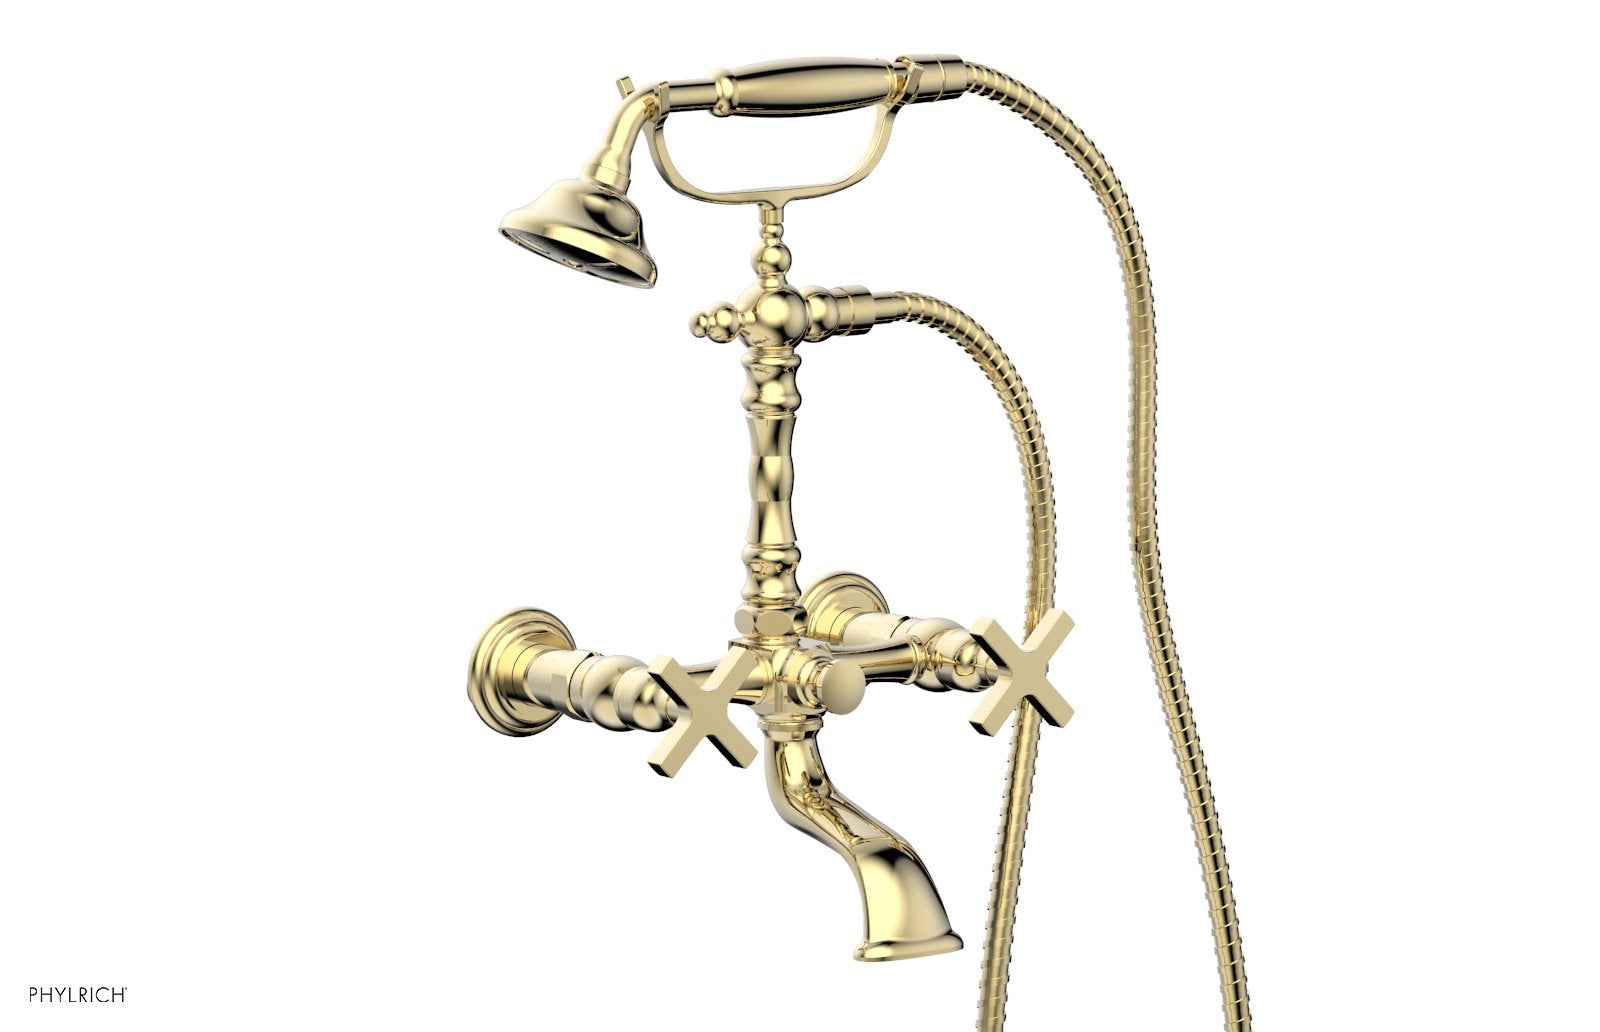 Phylrich HEX MODERN Exposed Tub & Hand Shower - Cross Handle